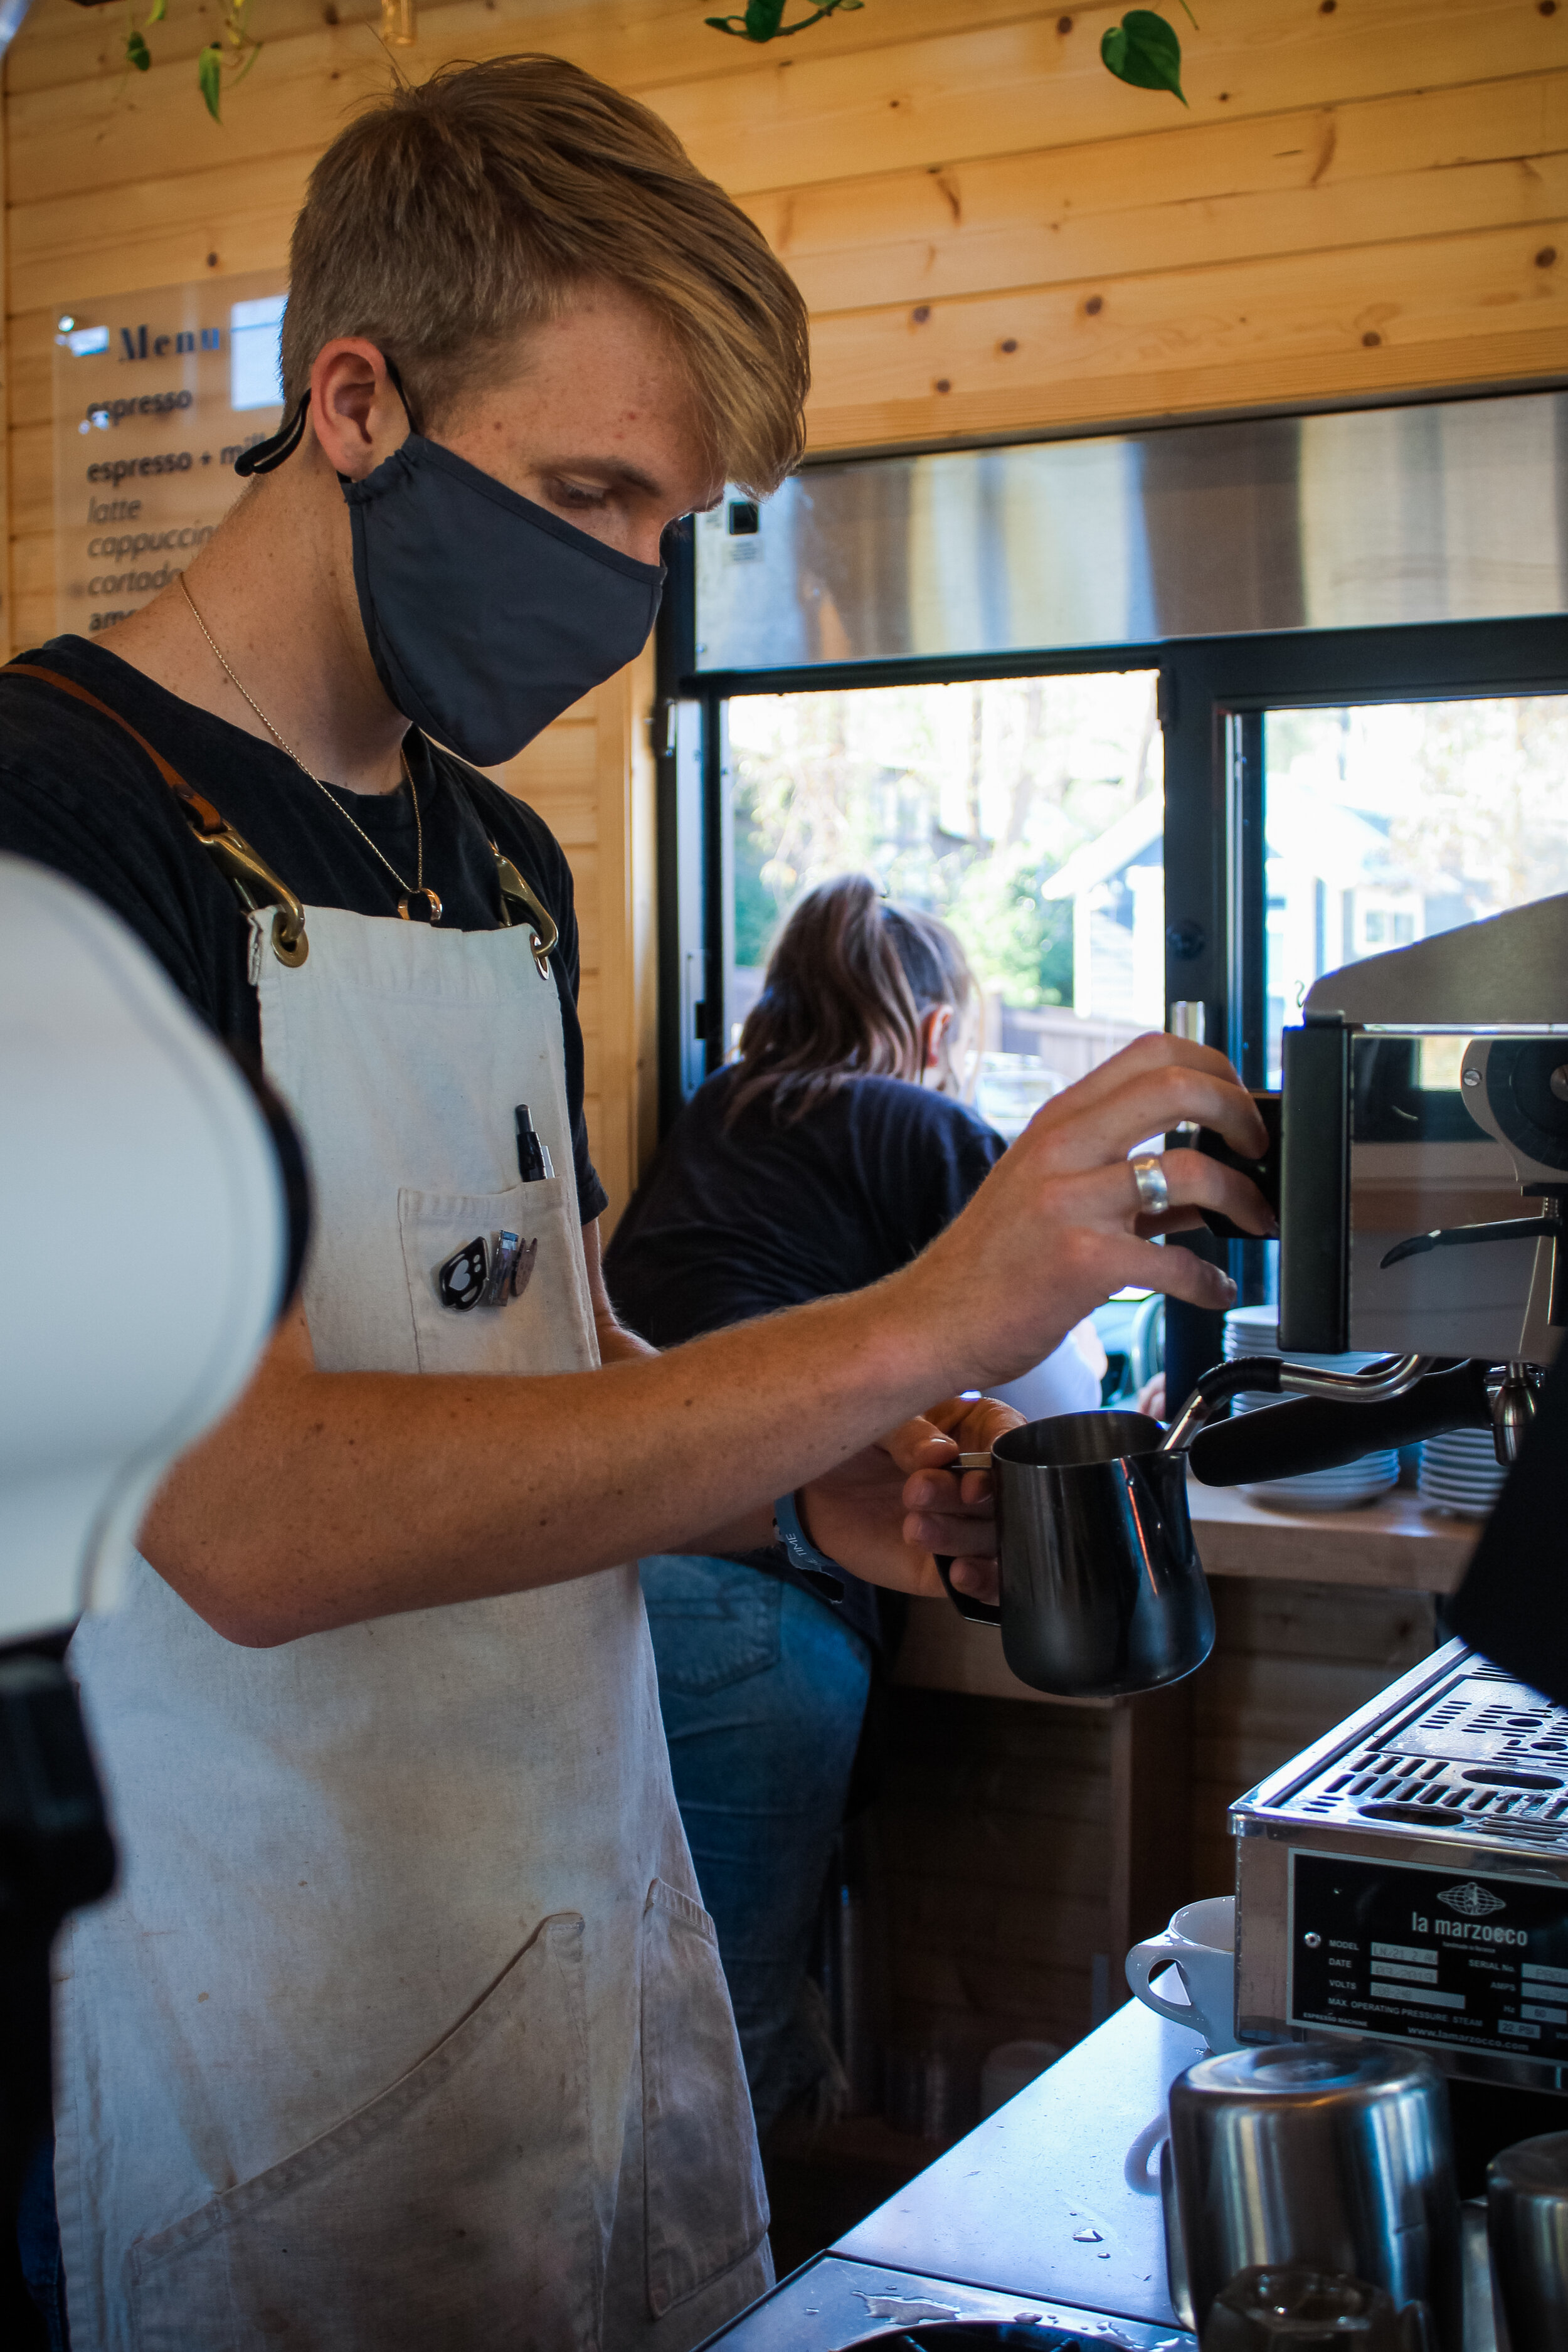 Barista Jacob Ertter finishes up the final stages of making a cappuccino.